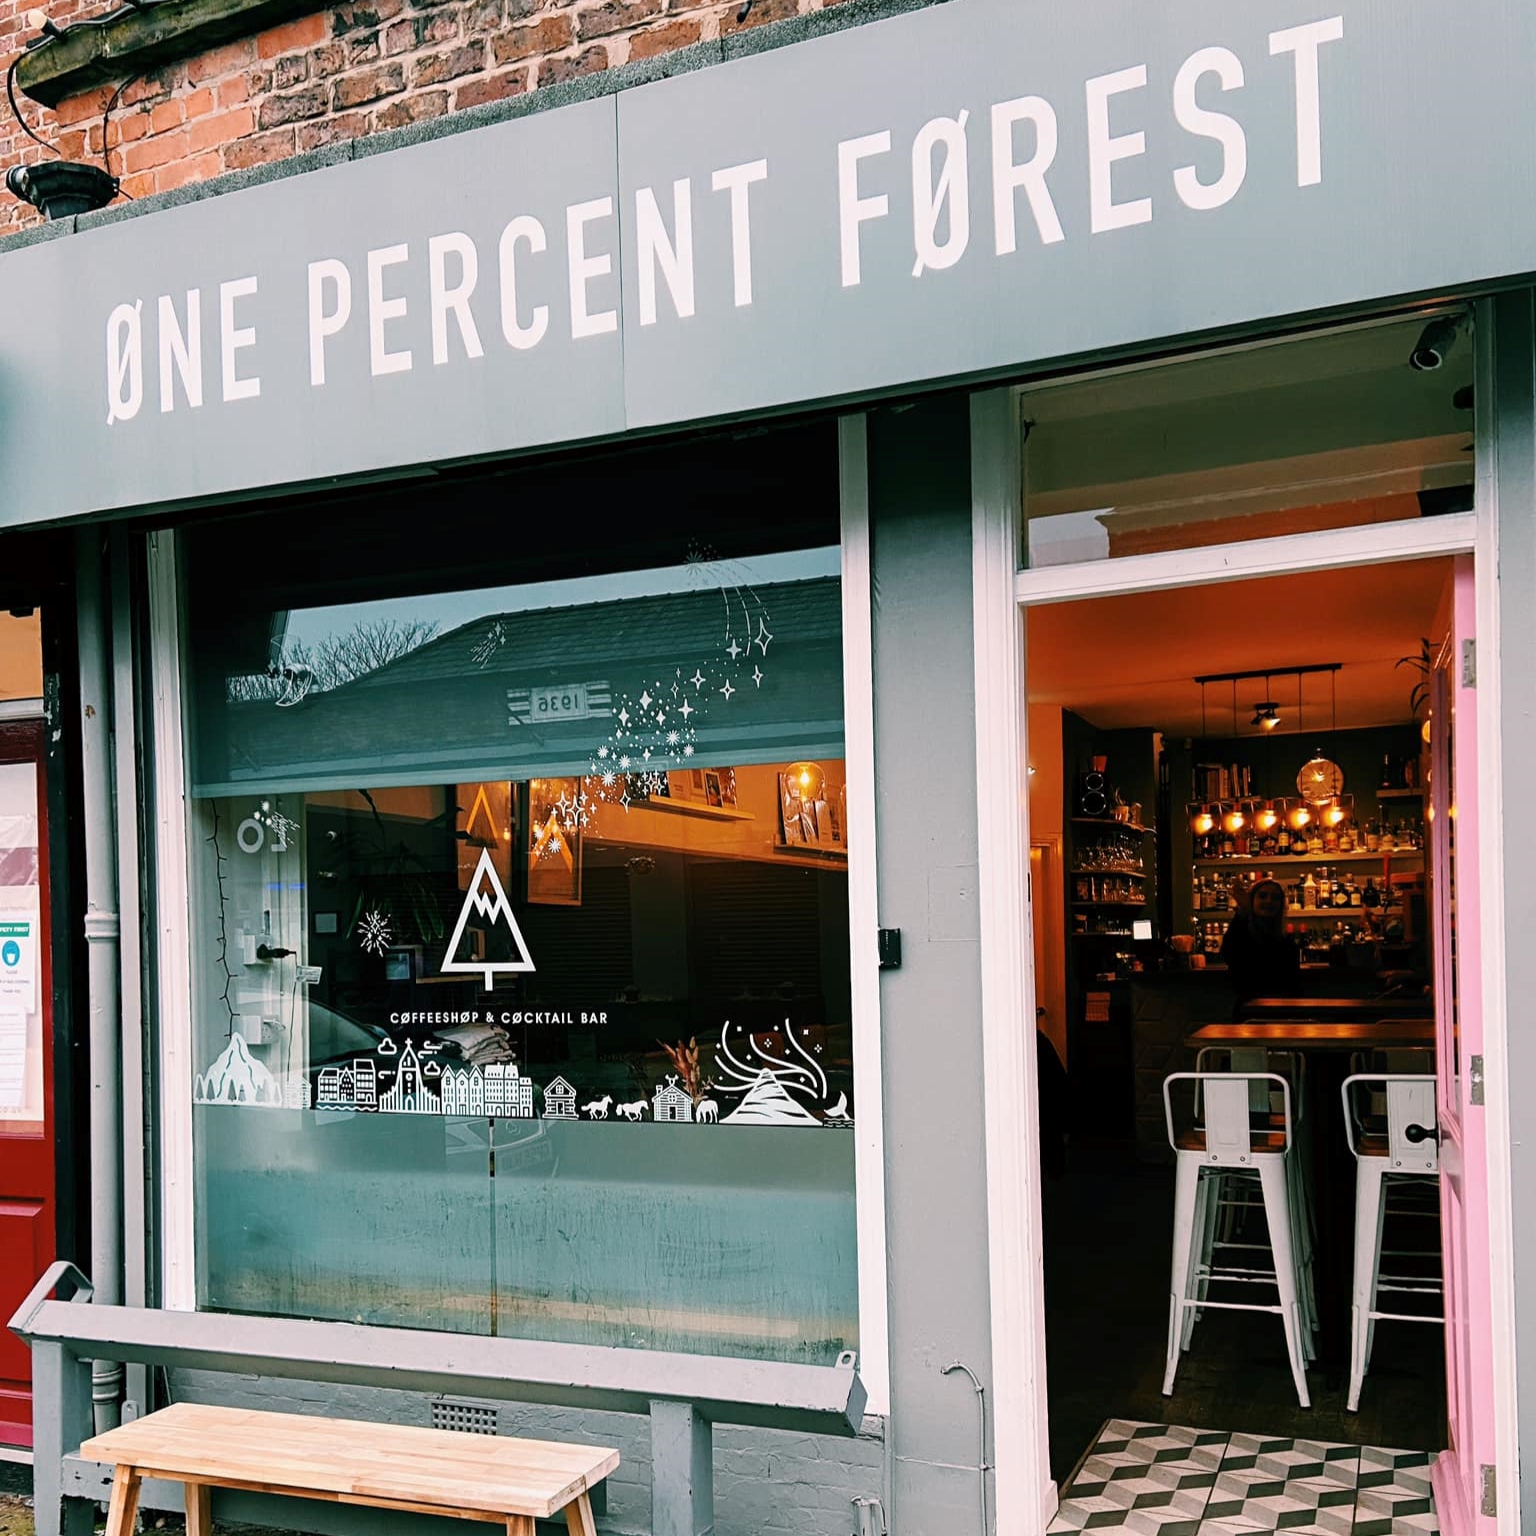 picture-of-shopfront-of-one-percent-forest-cafe-in-woolton